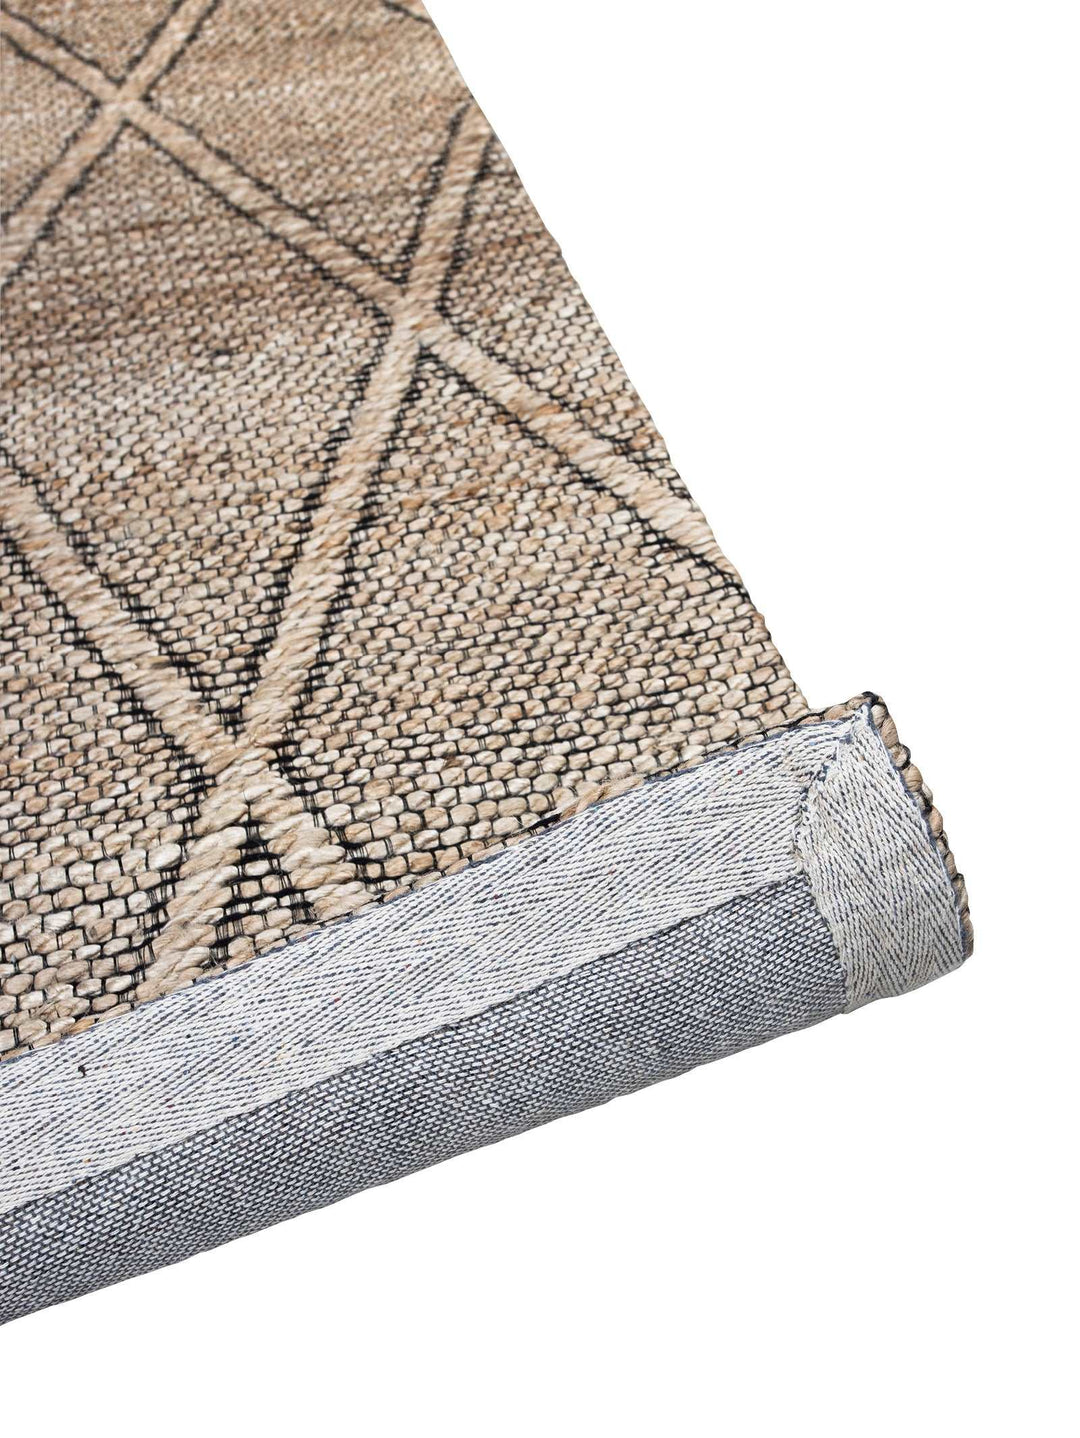 Double-Cross Rug in Natural - Rugs- Hertex Haus Online - Colour